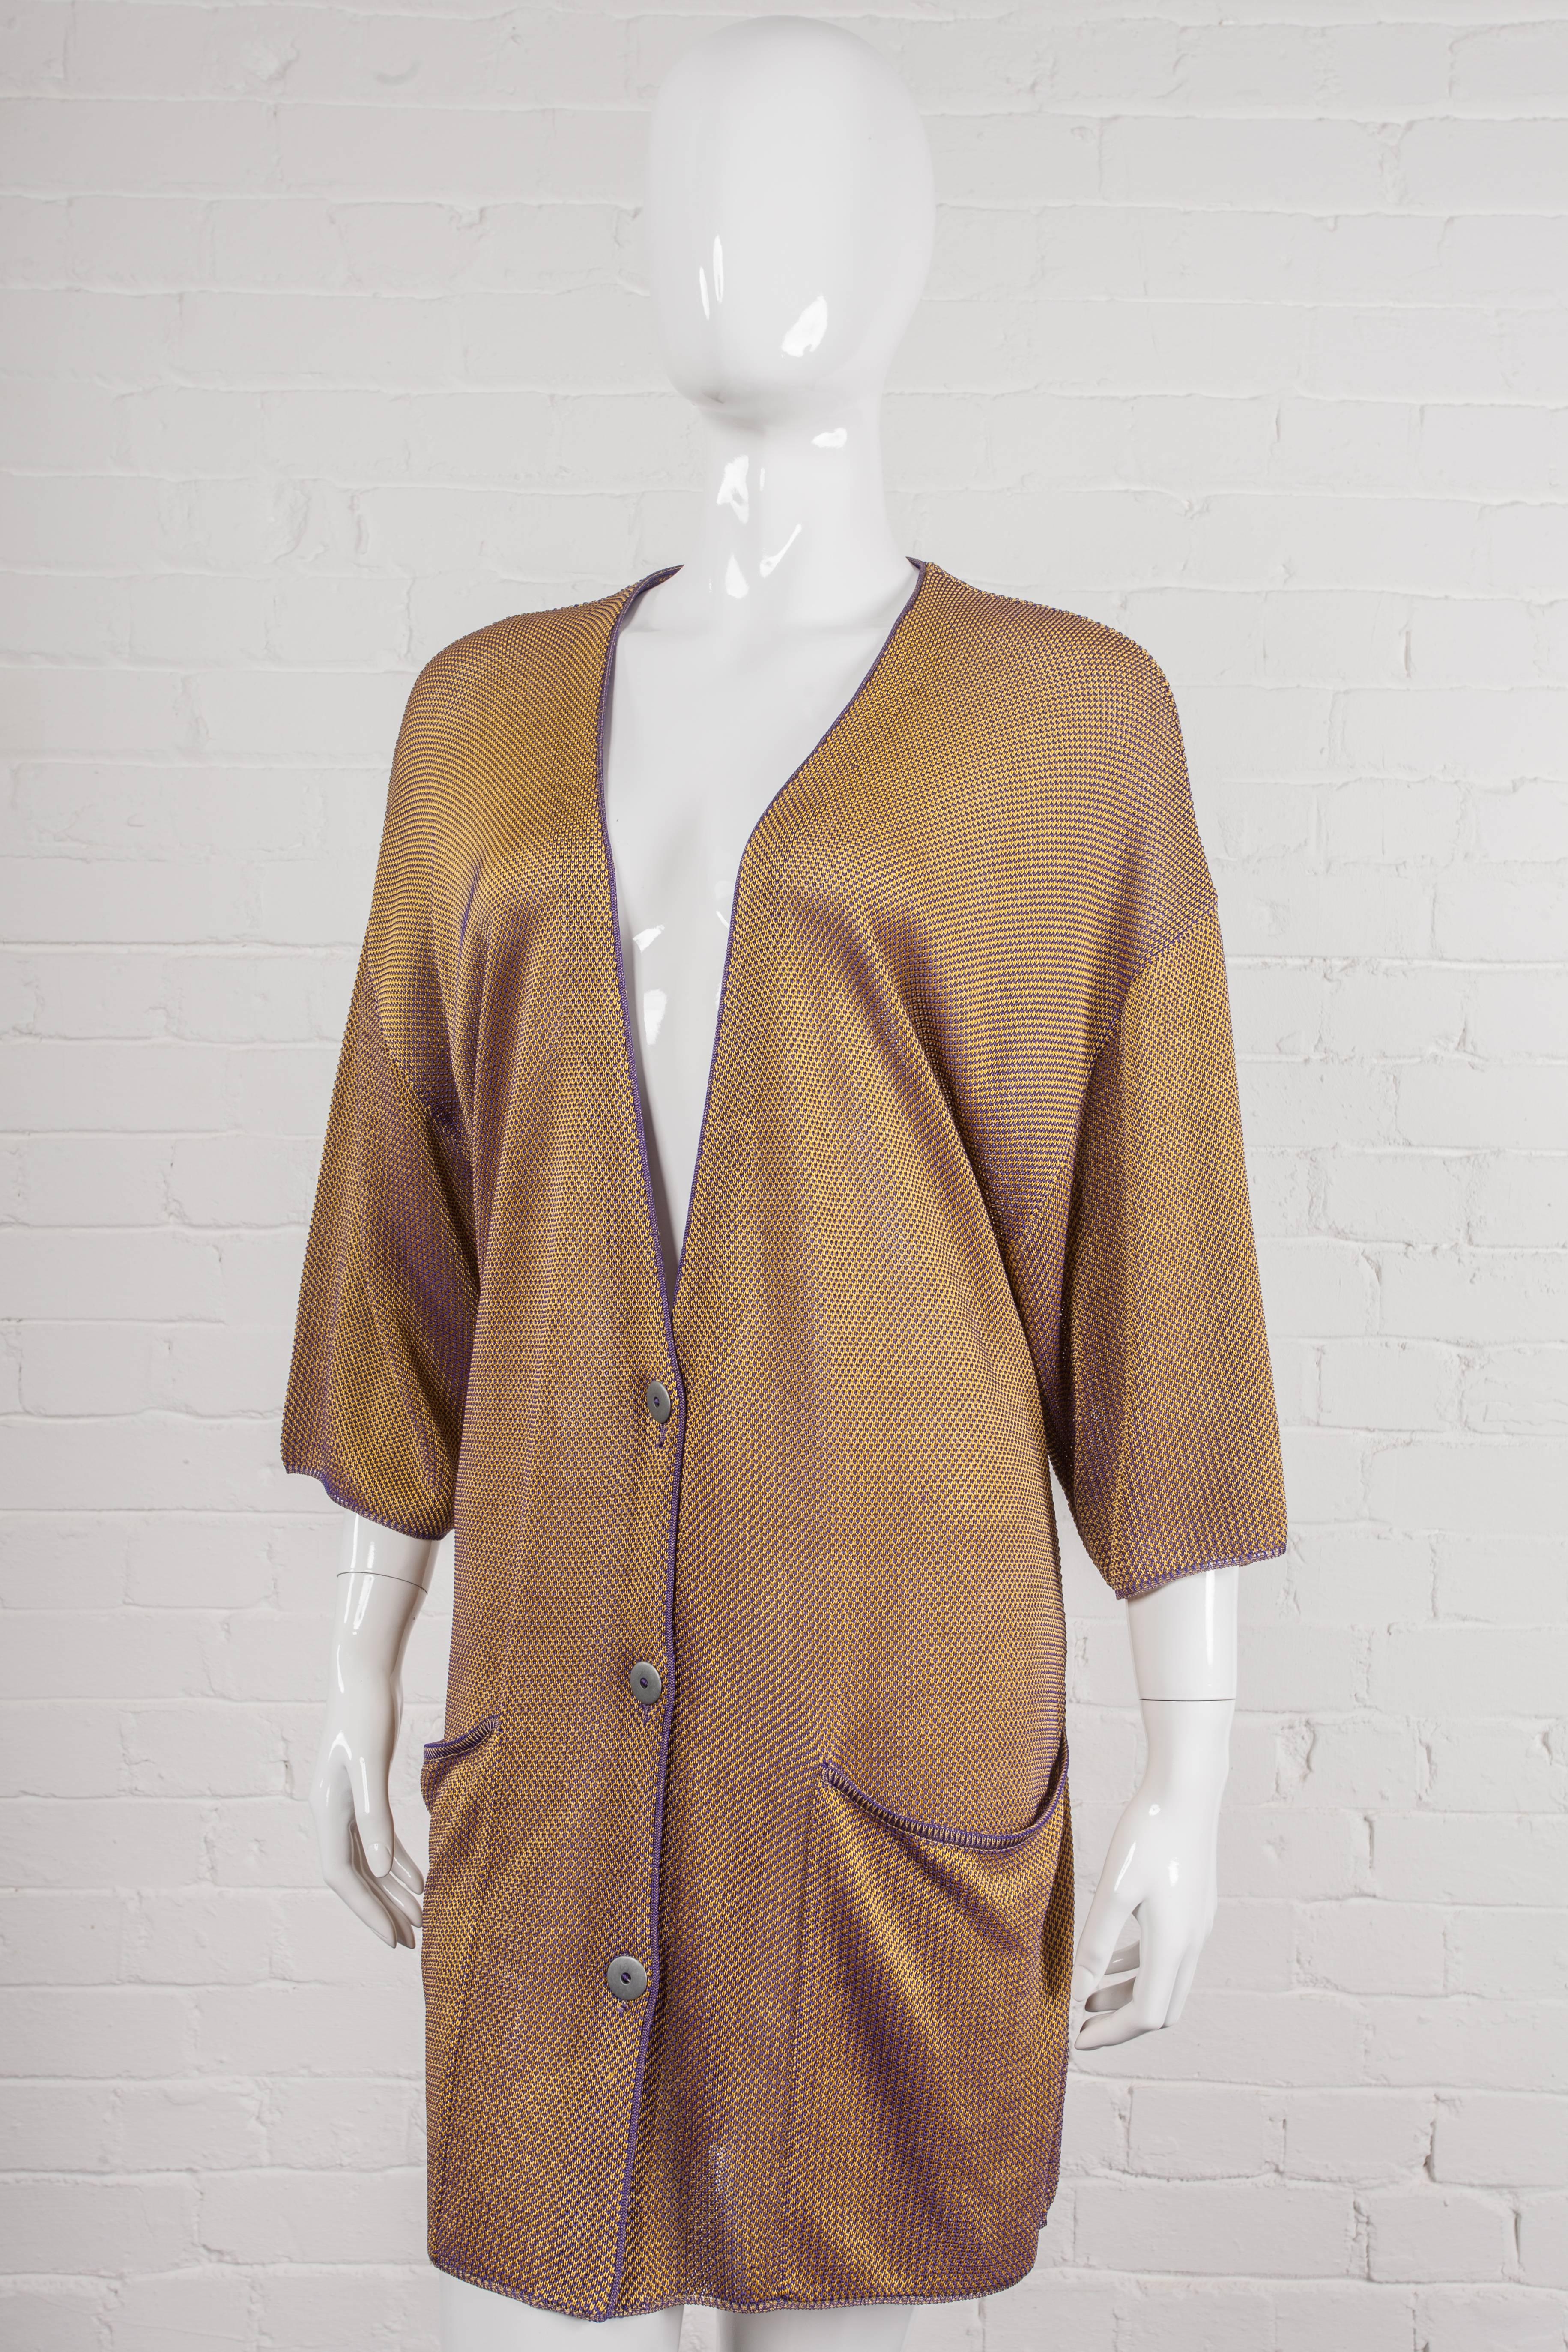 A loose-fitting ‘V’ neck style cardigan with drop shoulders and three-quarter length sleeves. Features an changeant opalescent gold and purple contrasting stitch effect, metal buttons and large patch pockets to the front hem.

Period: 1980s –